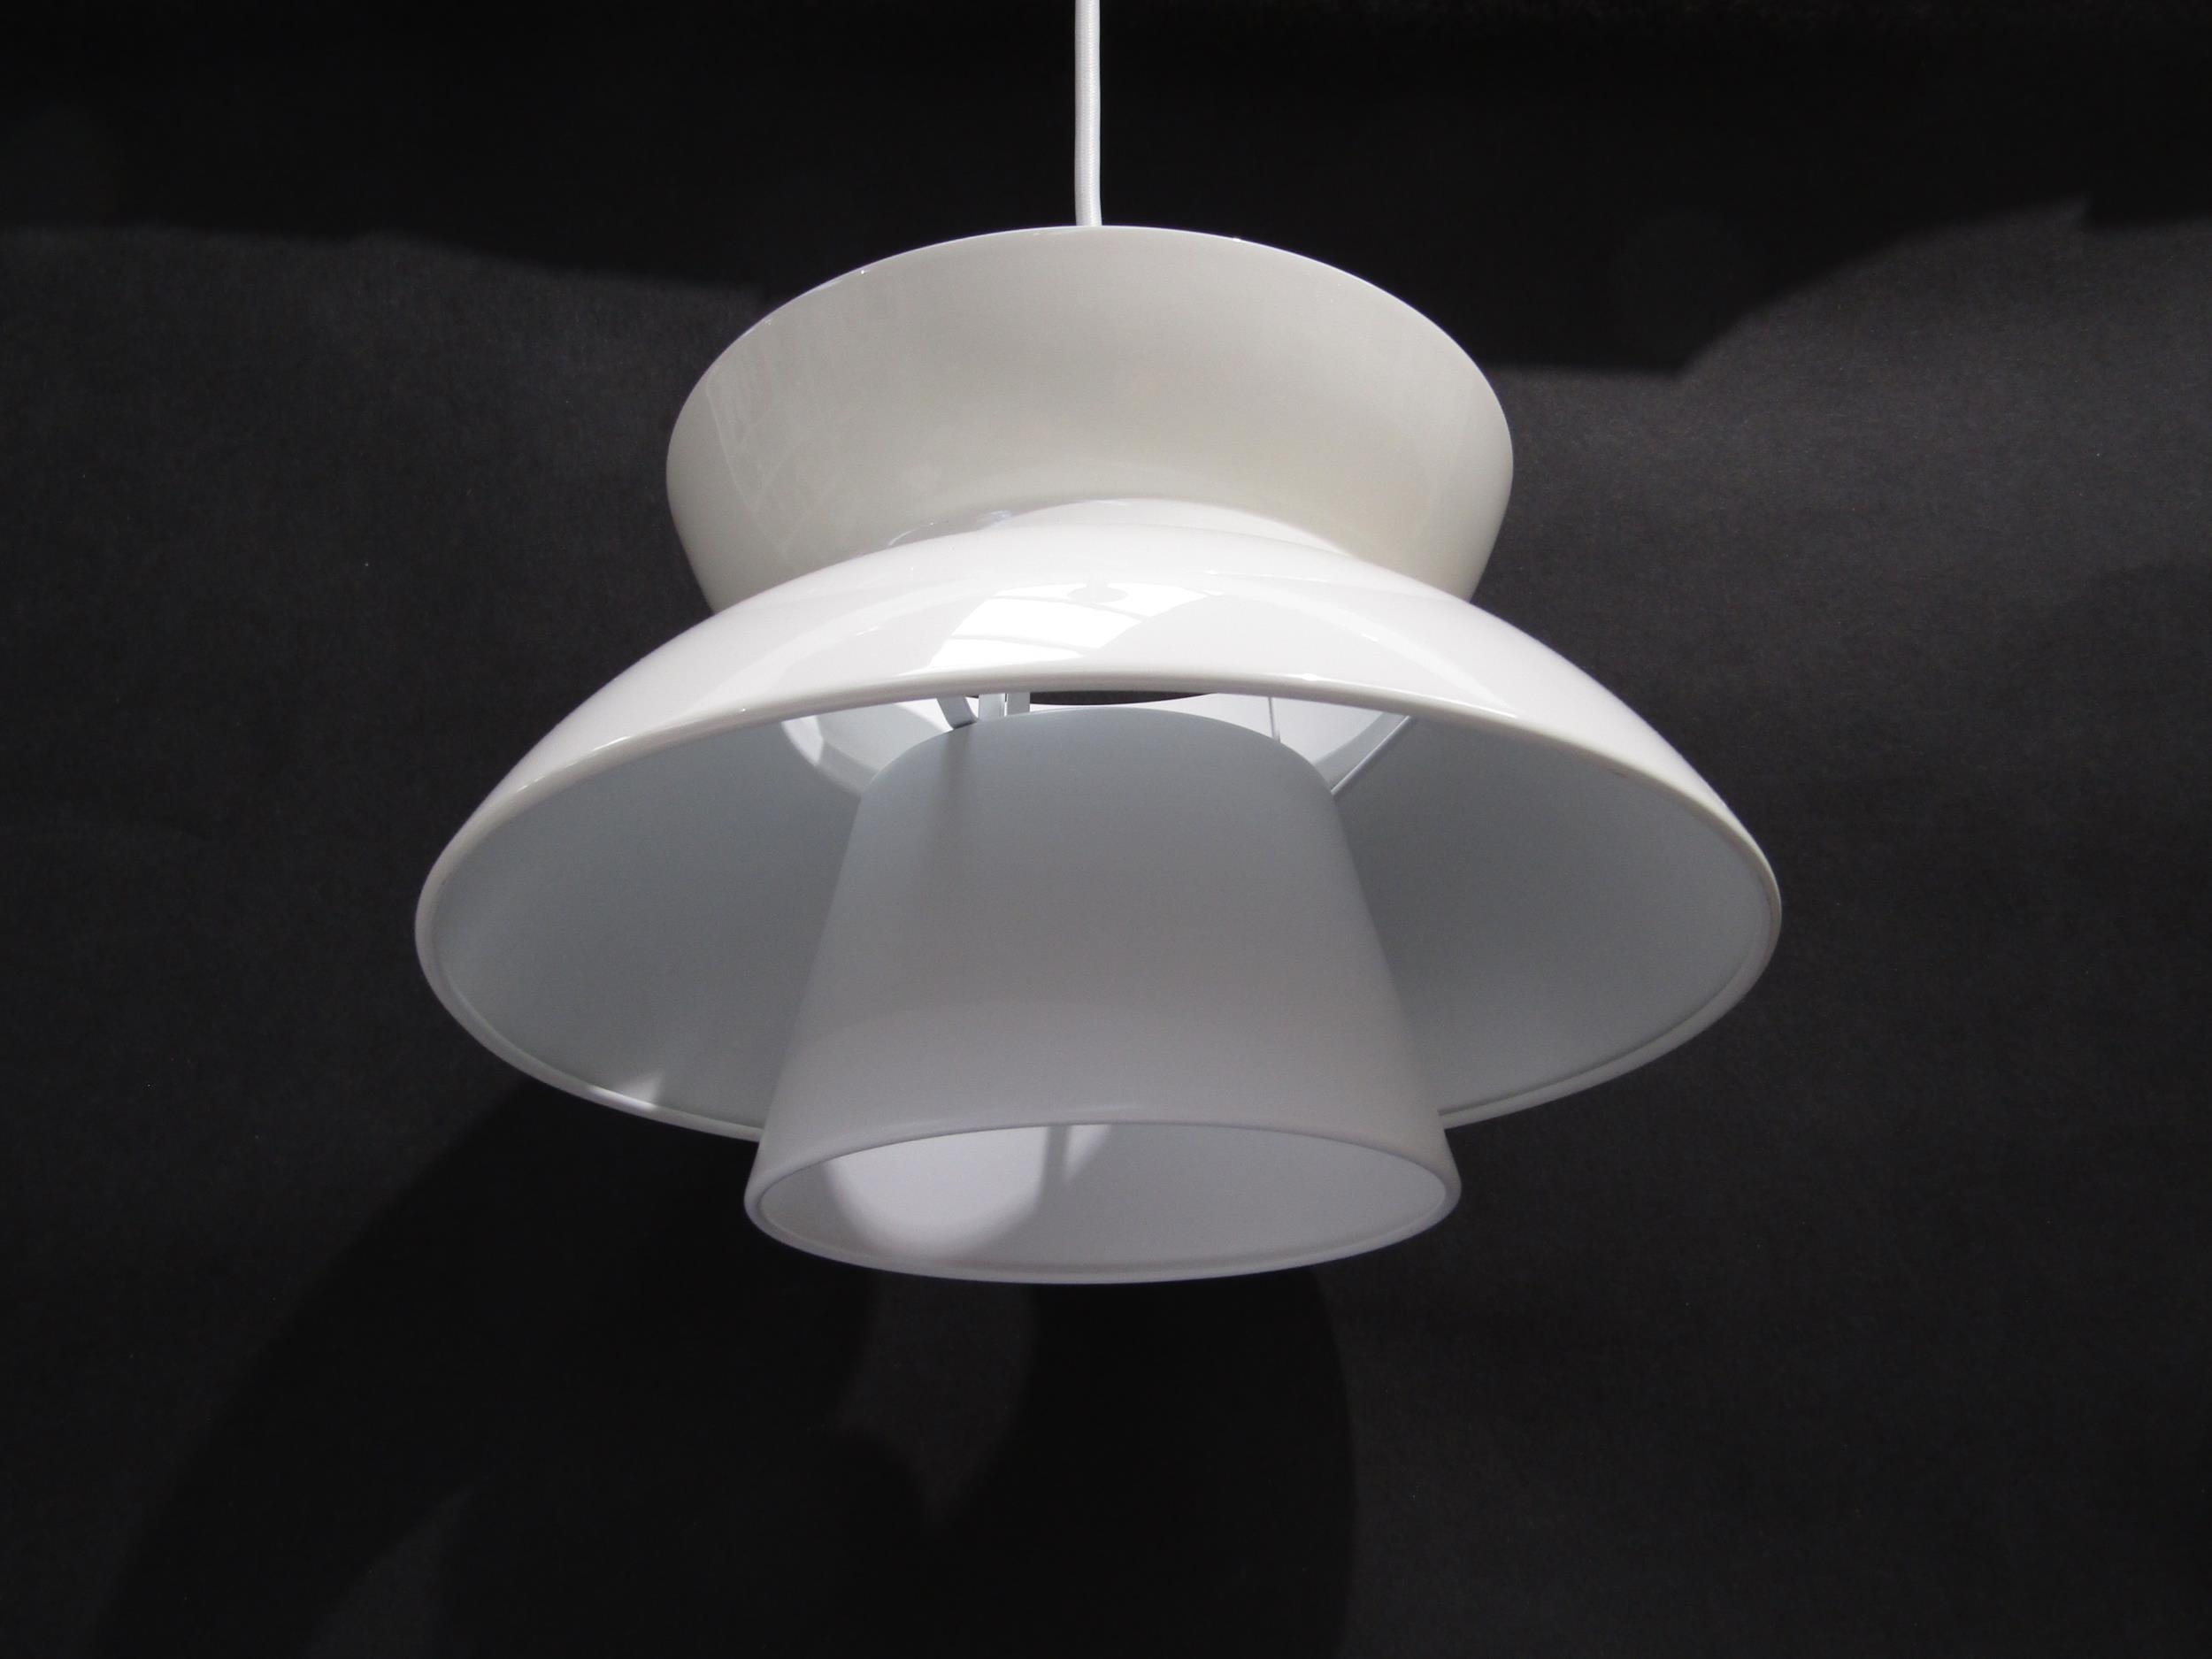 A Louis Poulsen two tiered ceiling pendant light, type No.18352 in white. 27cm diameter - Image 2 of 3